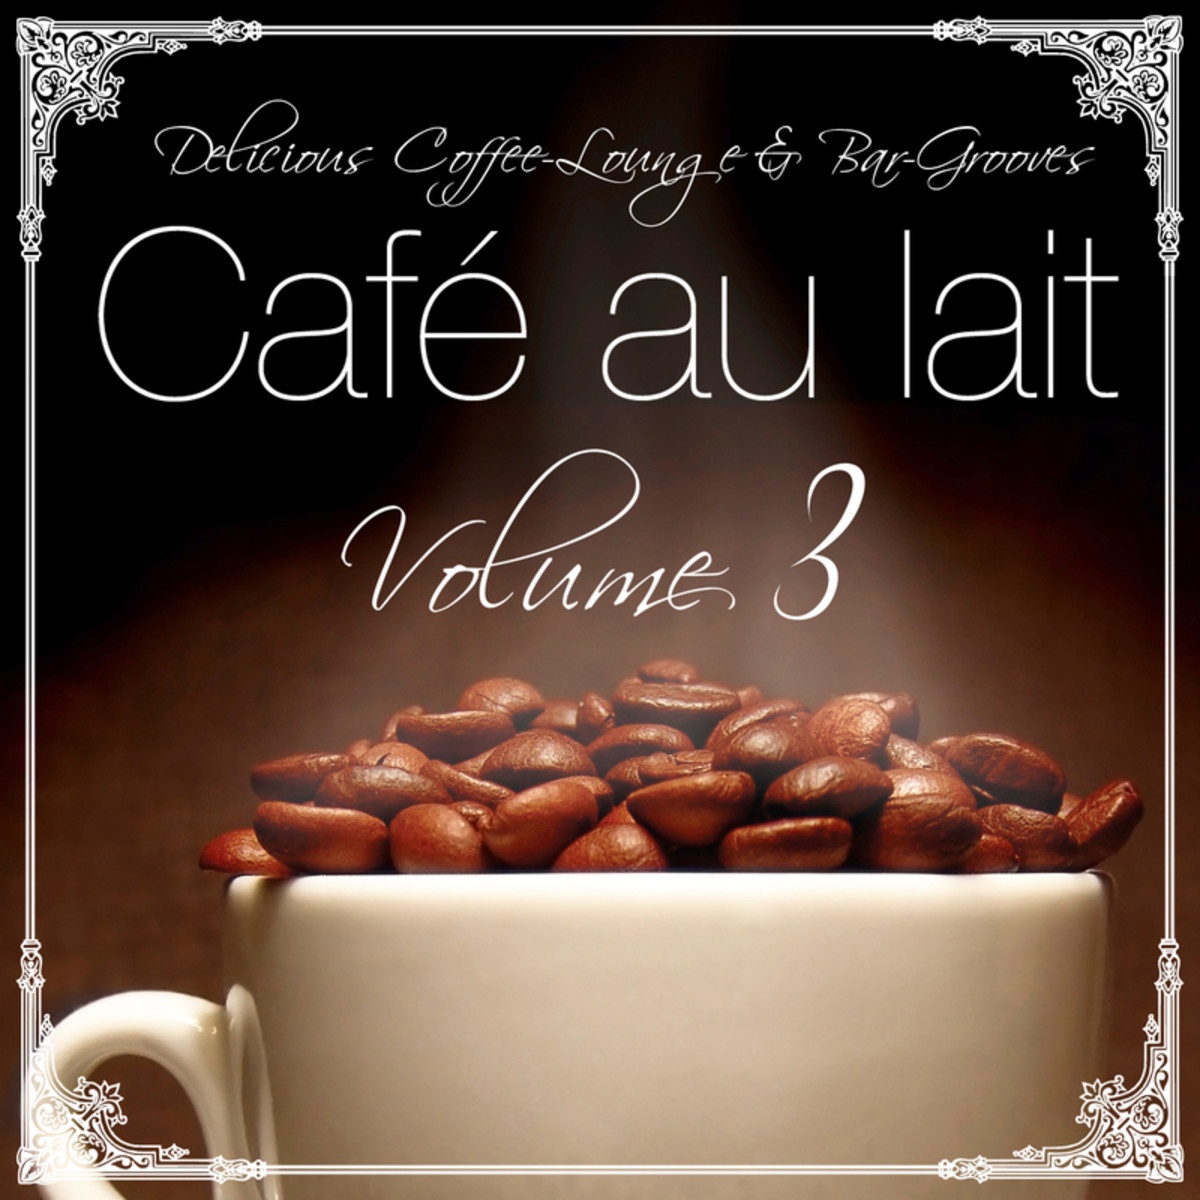 Cafe au lait Vol.3 (Delicious Coffee Lounge and Bar-Grooves)